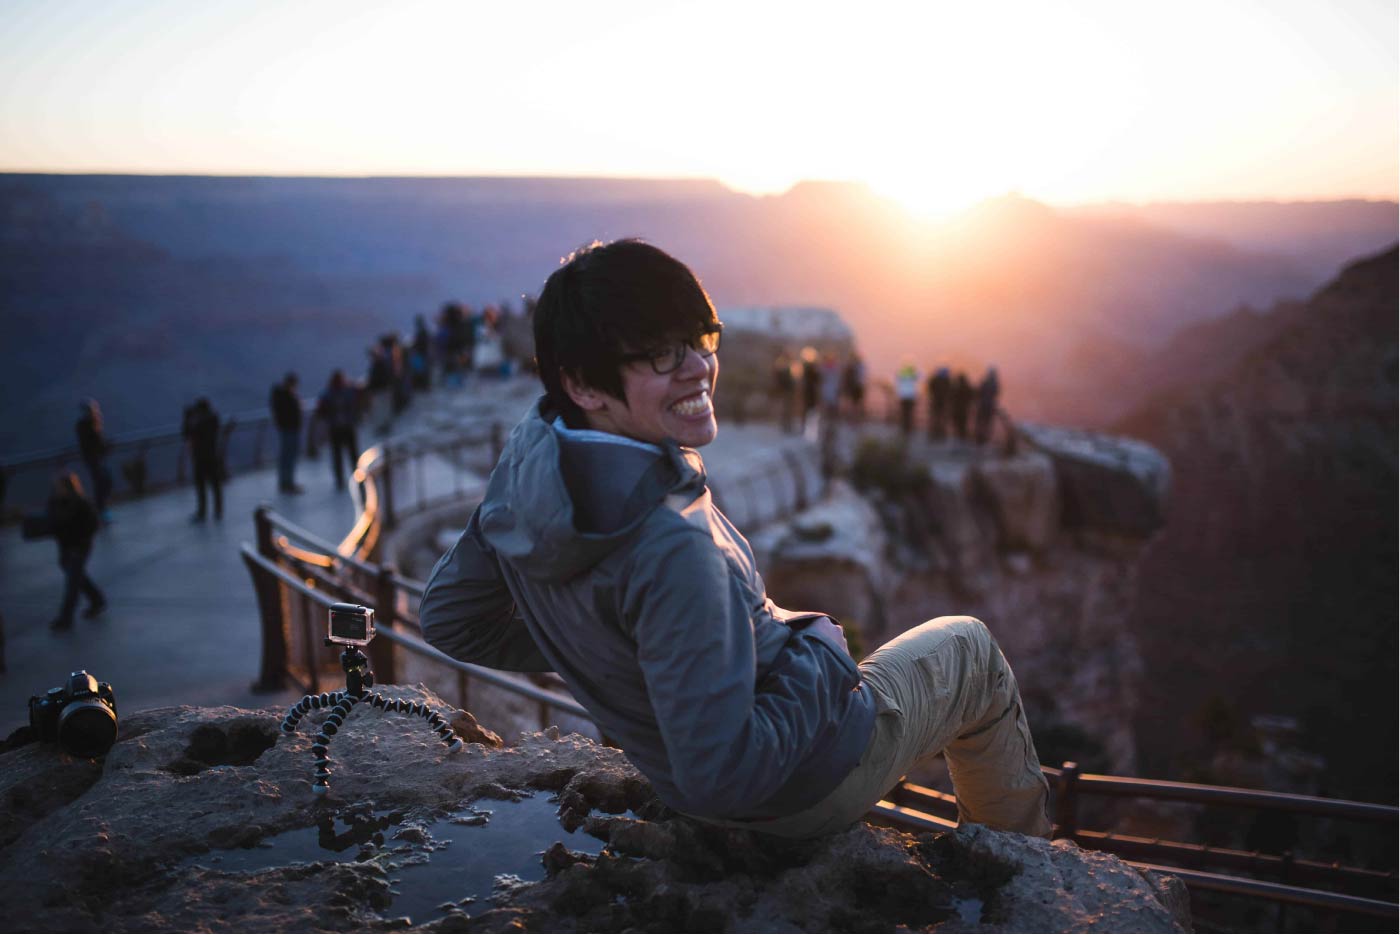 Various Lighting Visuals during the Sunrise at Mather's Point in Grand Canyon, Arizona_03